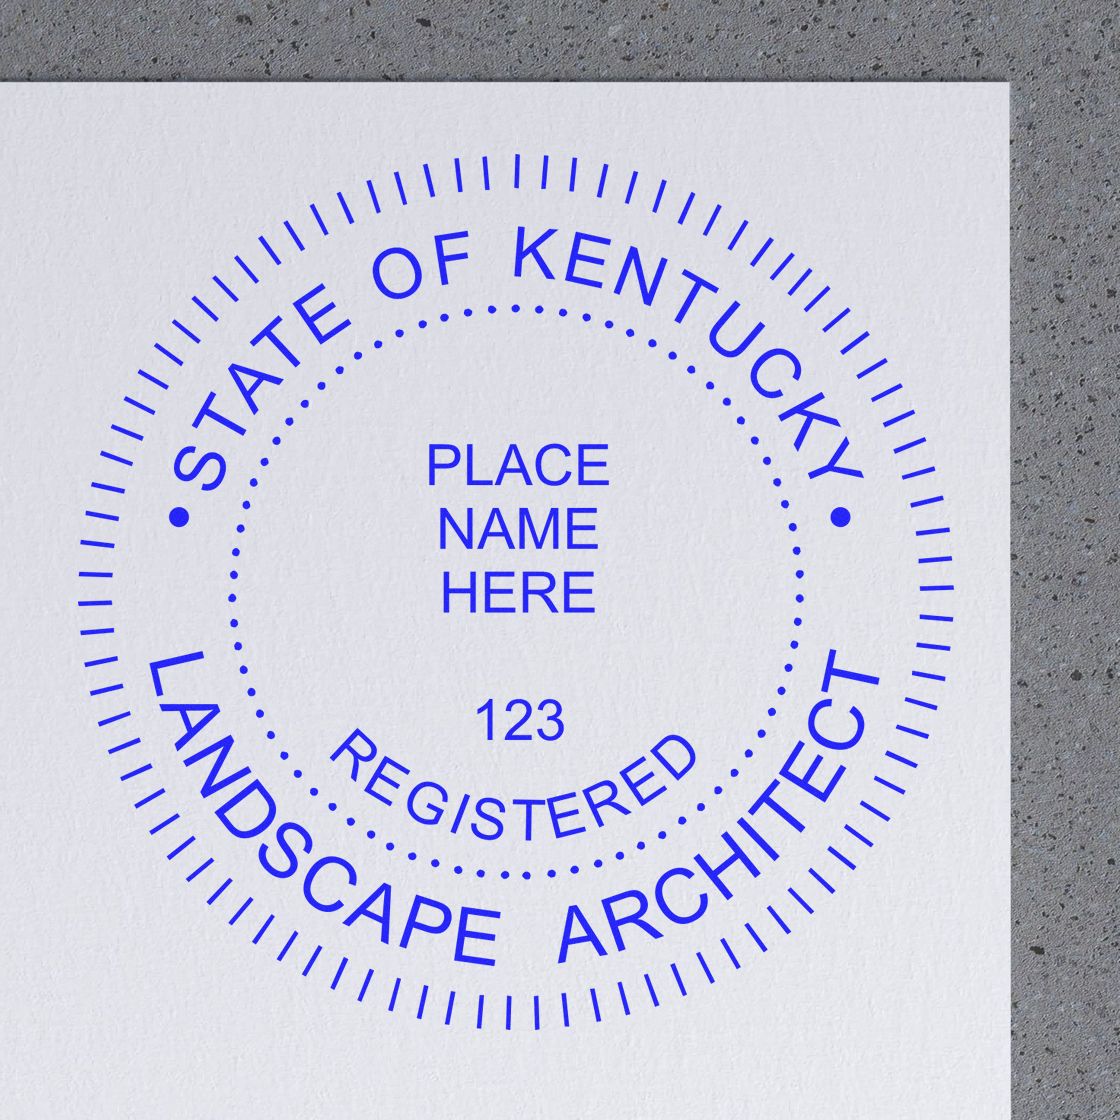 The Premium MaxLight Pre-Inked Kentucky Landscape Architectural Stamp stamp impression comes to life with a crisp, detailed photo on paper - showcasing true professional quality.